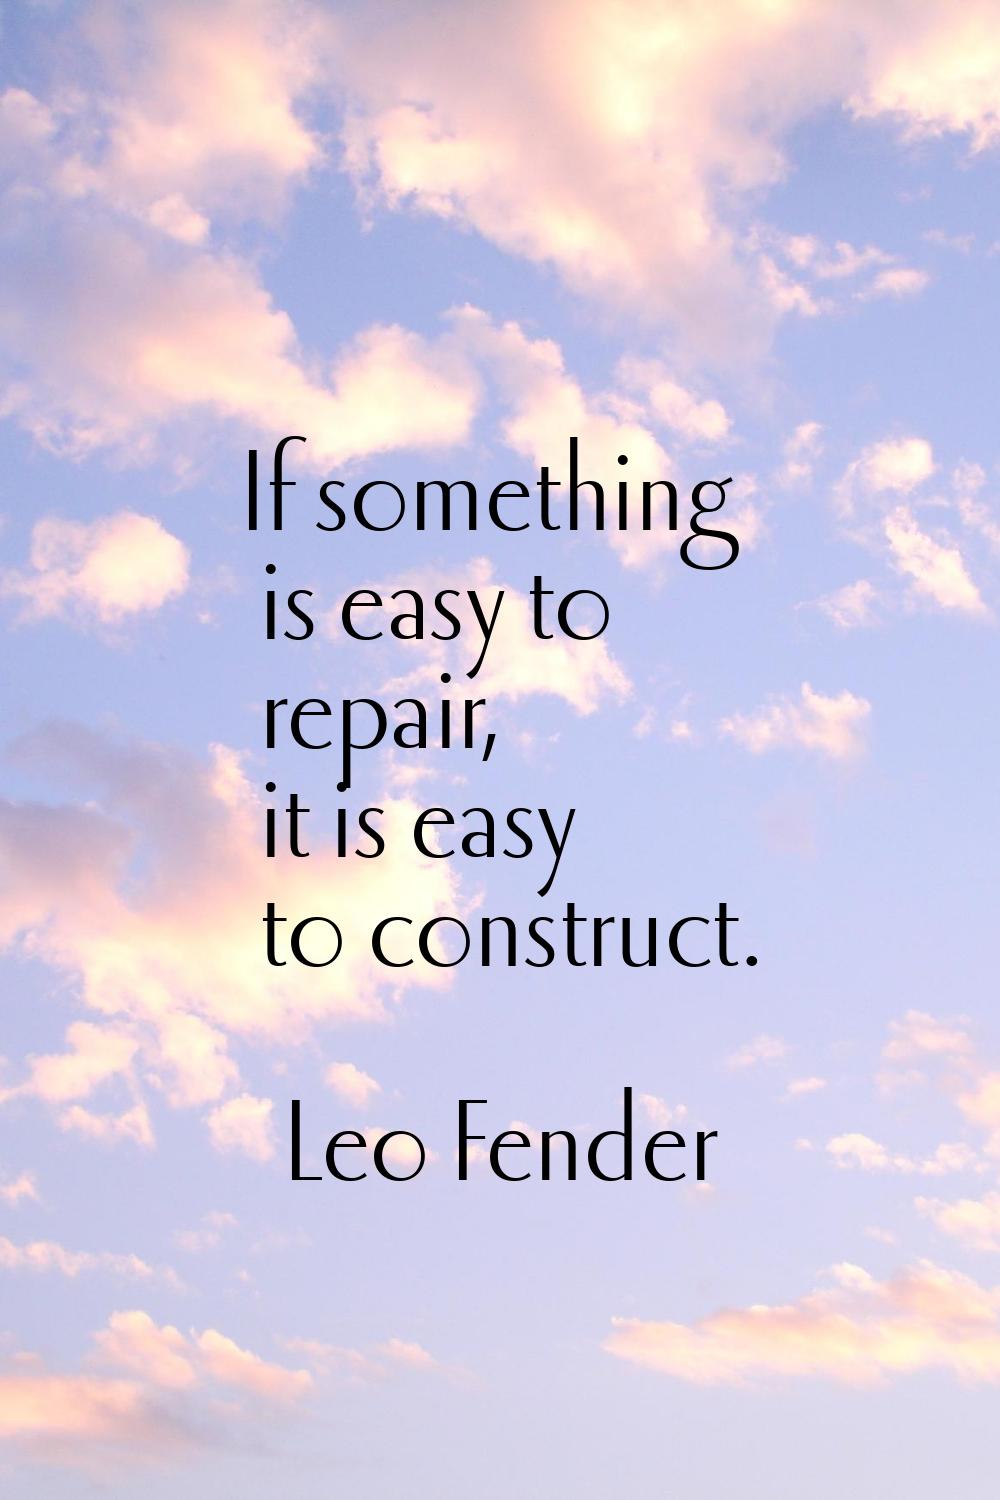 If something is easy to repair, it is easy to construct.